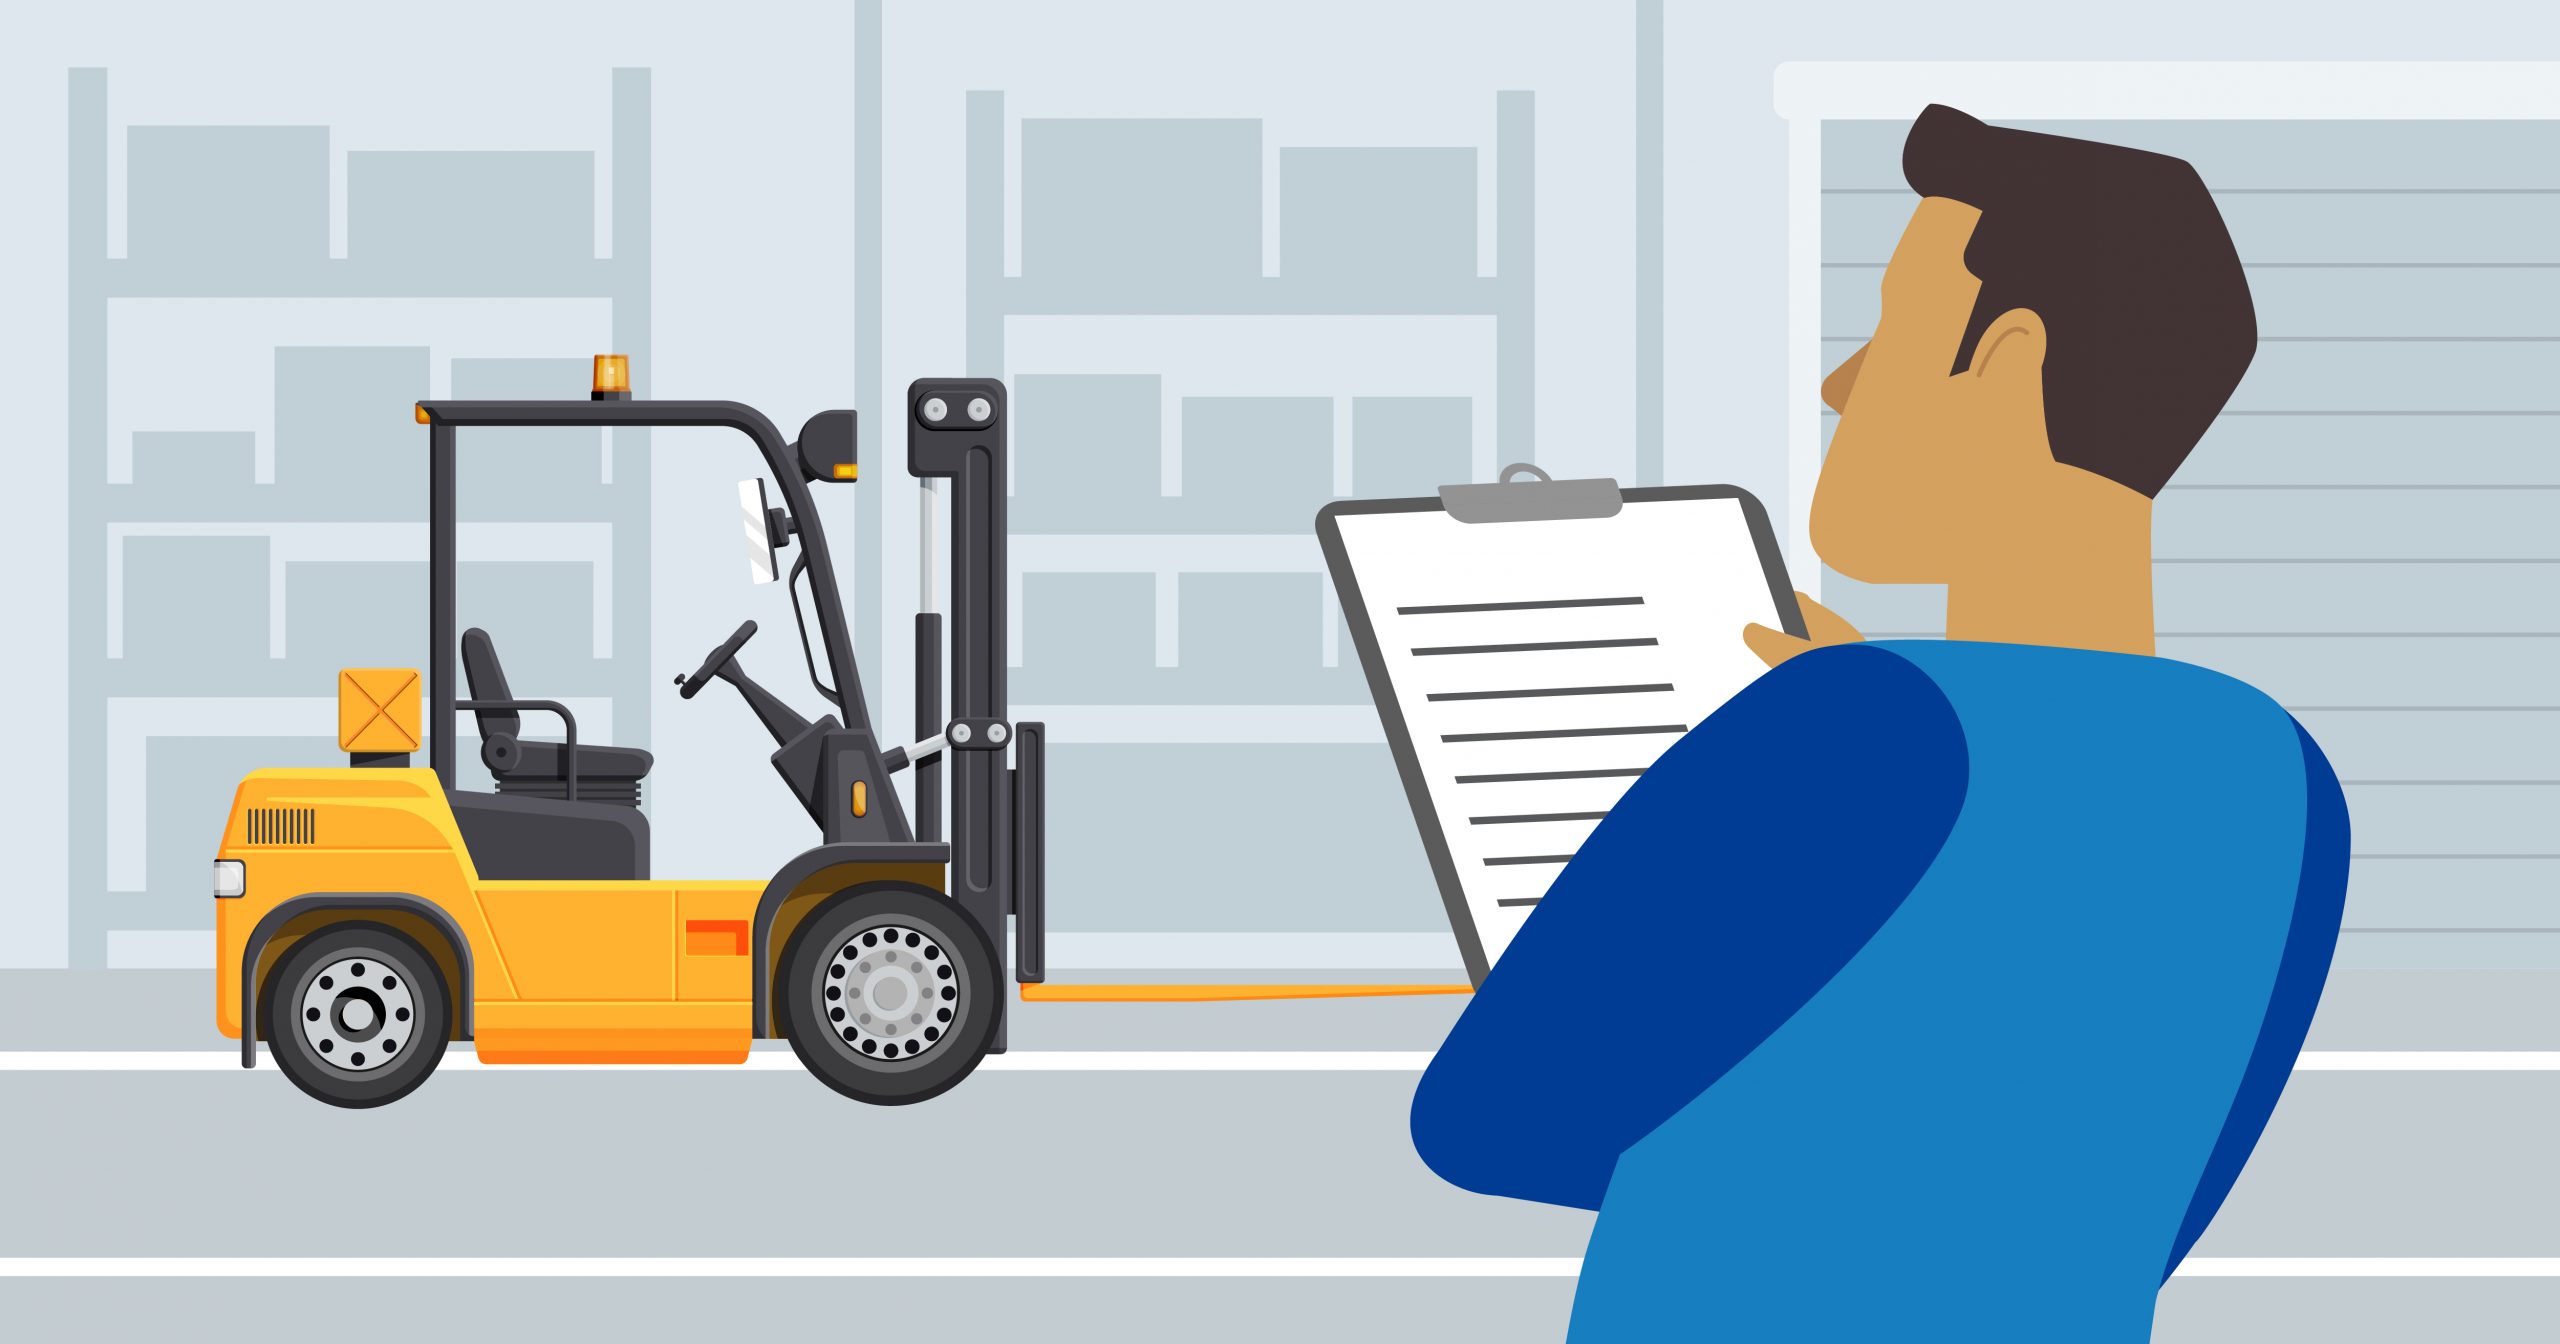 10 common mistakes to avoid during a forklift practical test - Forgetting to carry out a pre-shift inspection 